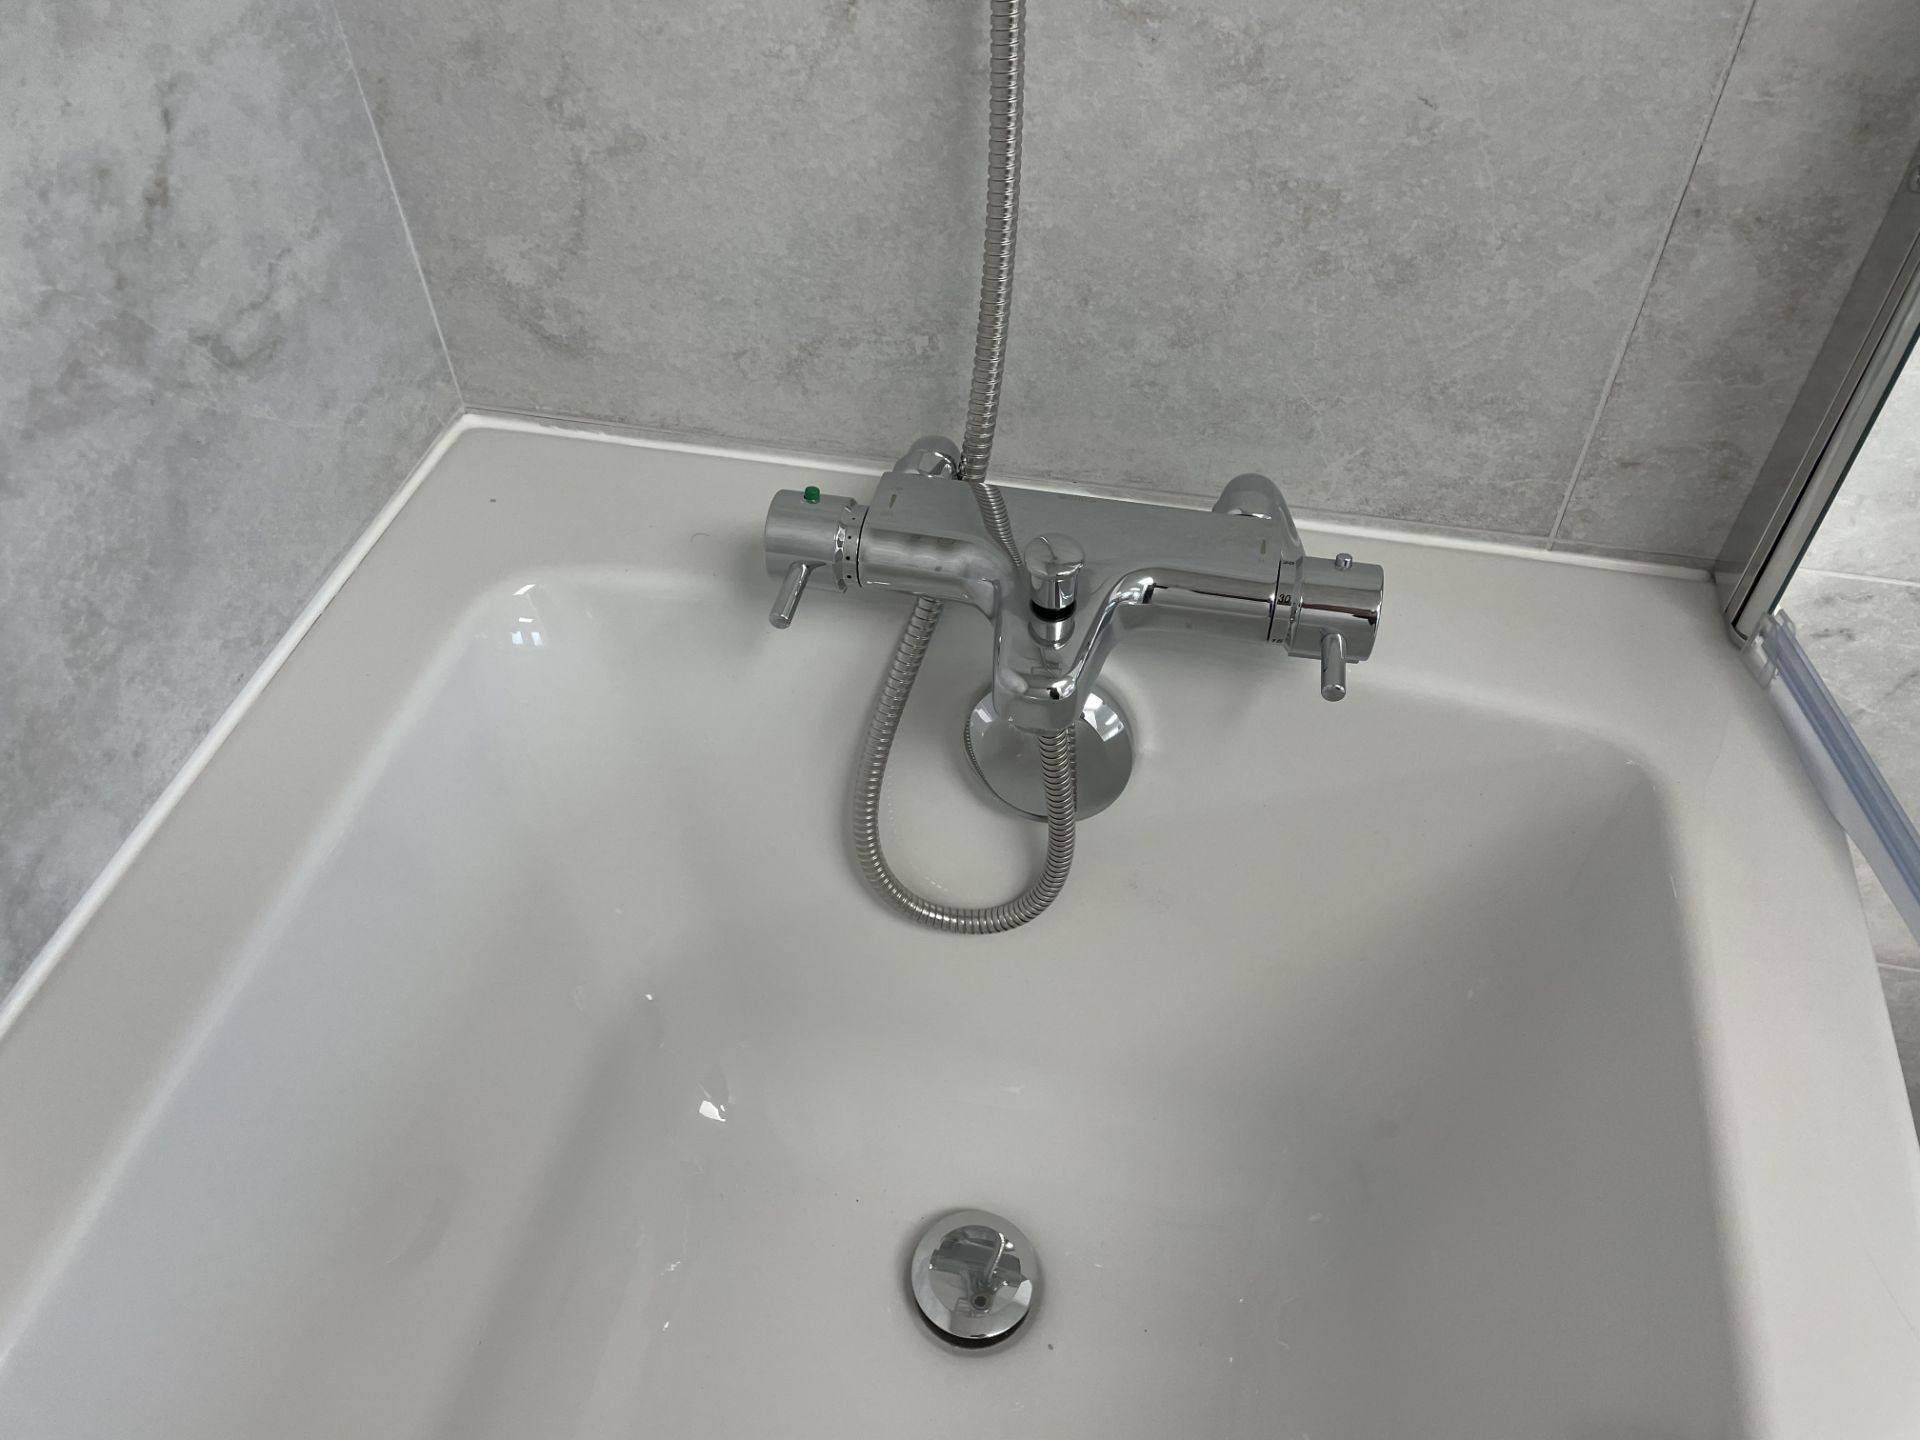 BATH WITH SIDE PANEL MIXER TAP & SHOWER SCREEN 700 x 1700 - Image 4 of 4